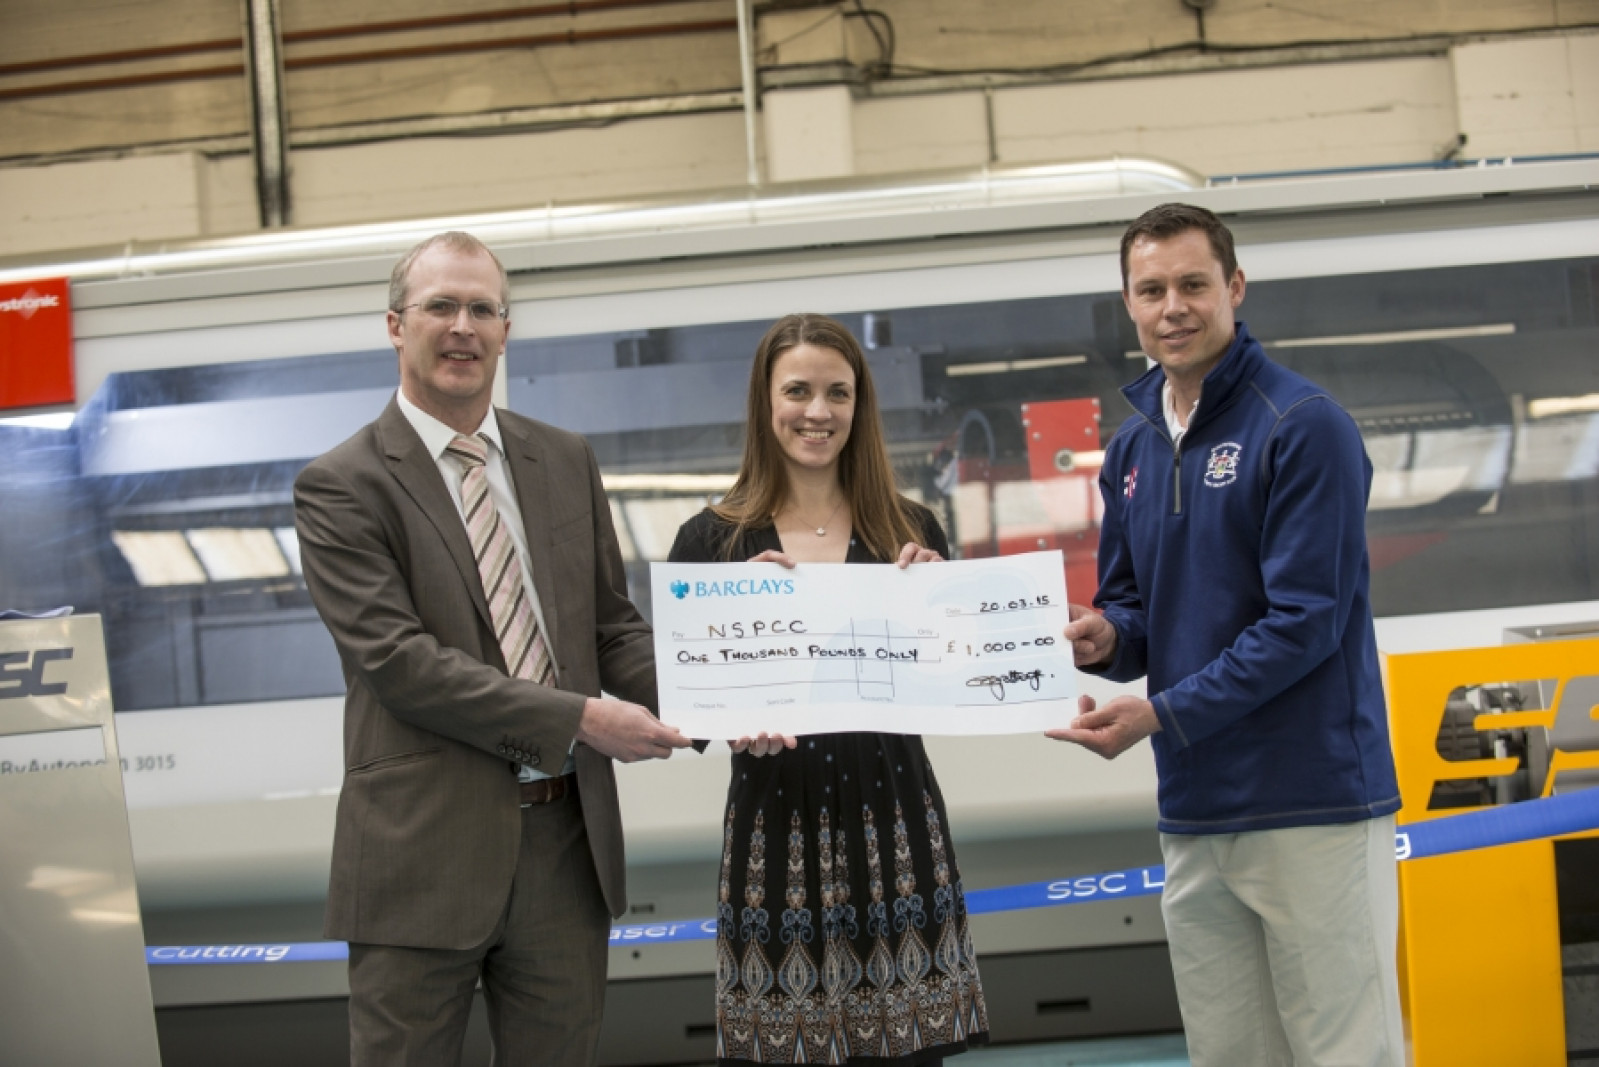 NSPCC Bowled Over By Donation At Laser Cutting Fac...